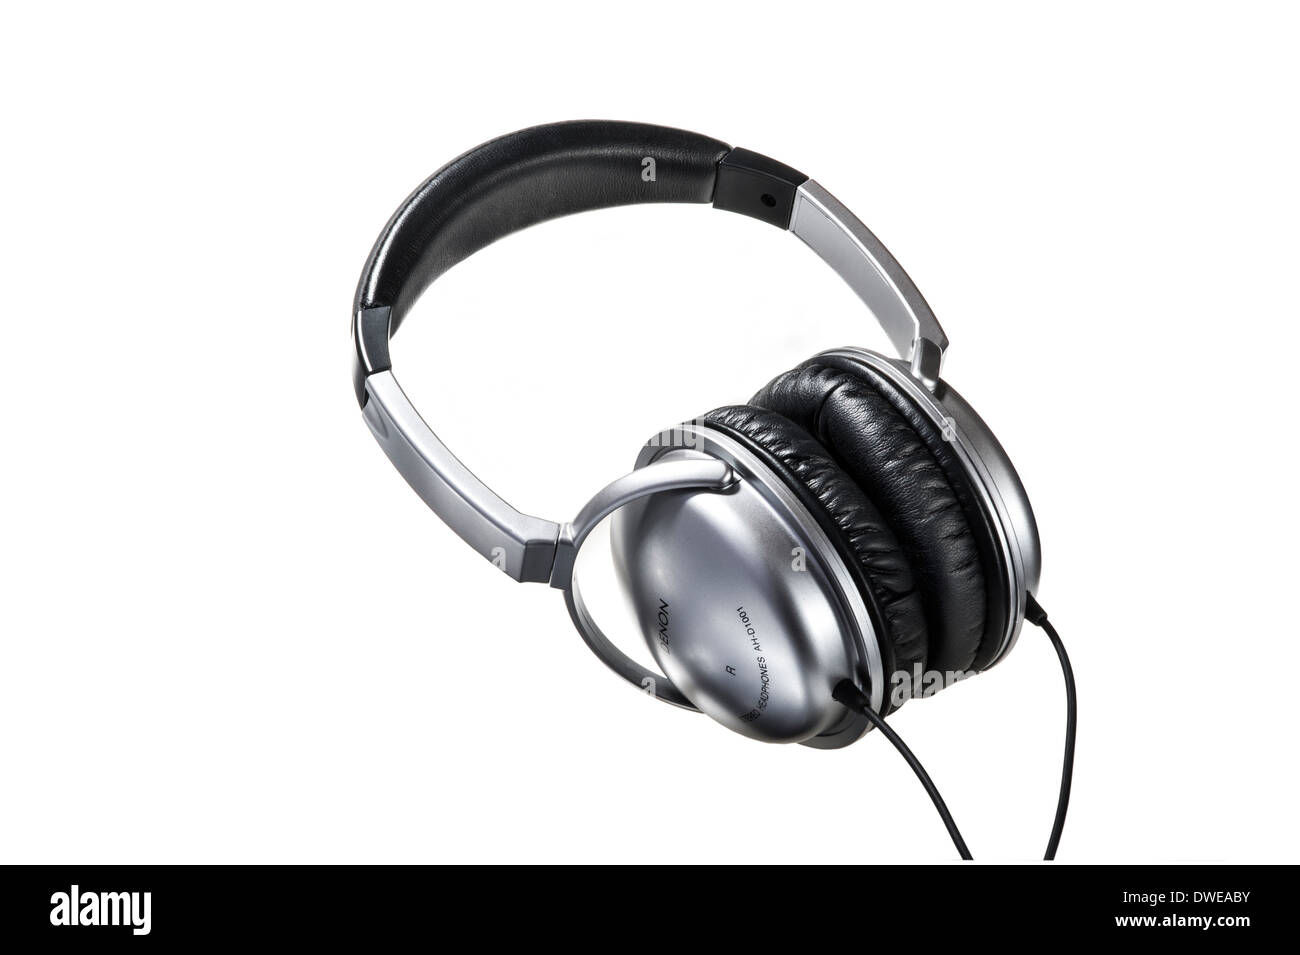 A pair of headphones on white background. Stock Photo